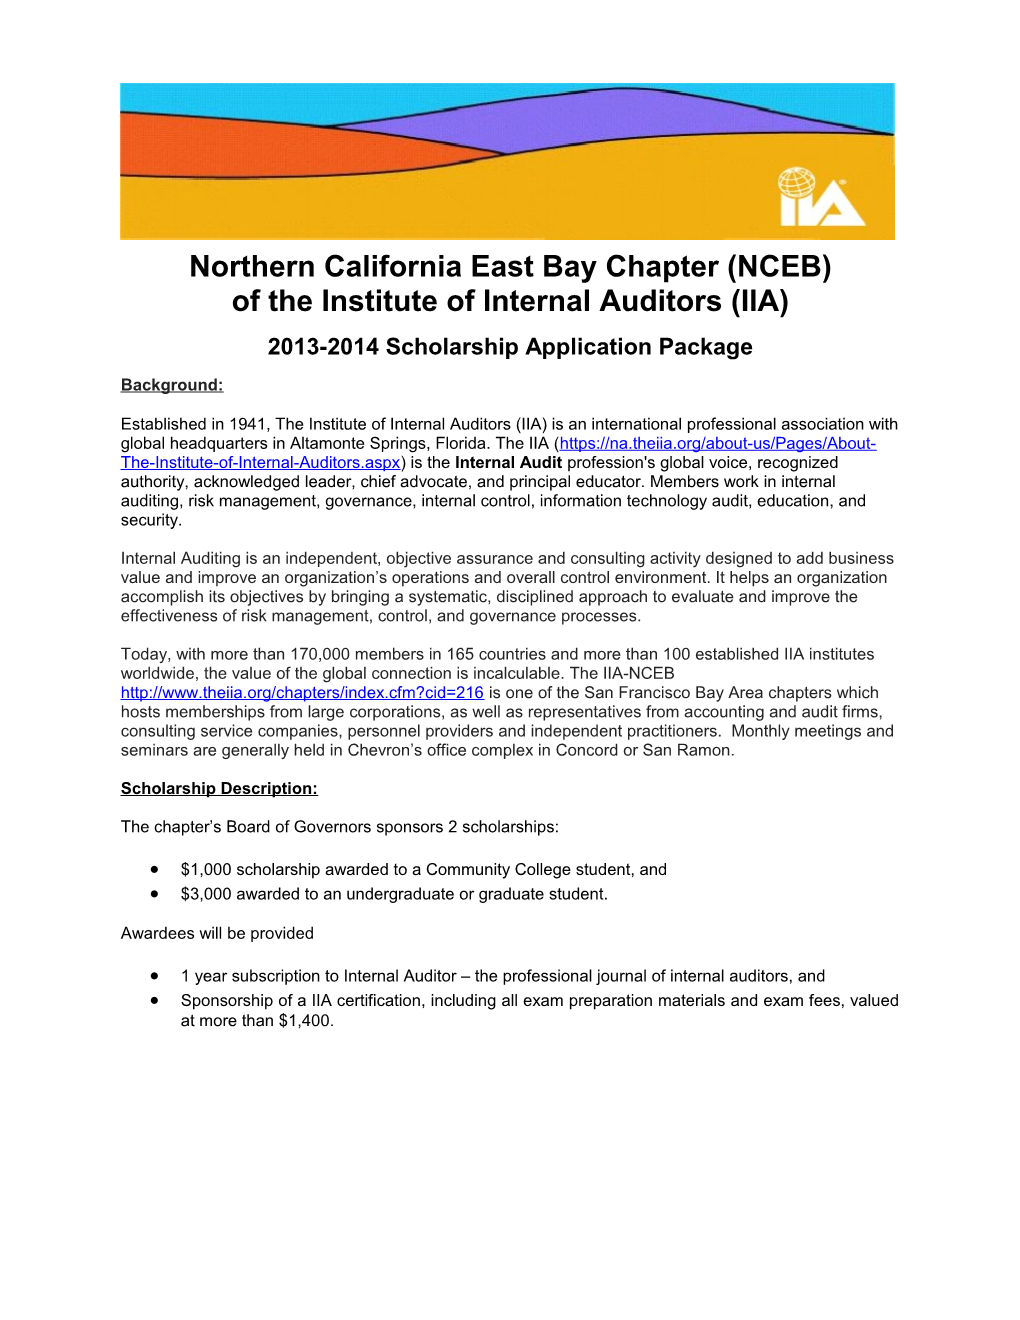 Northern California East Bay Chapter of the Institute of Internal Auditors